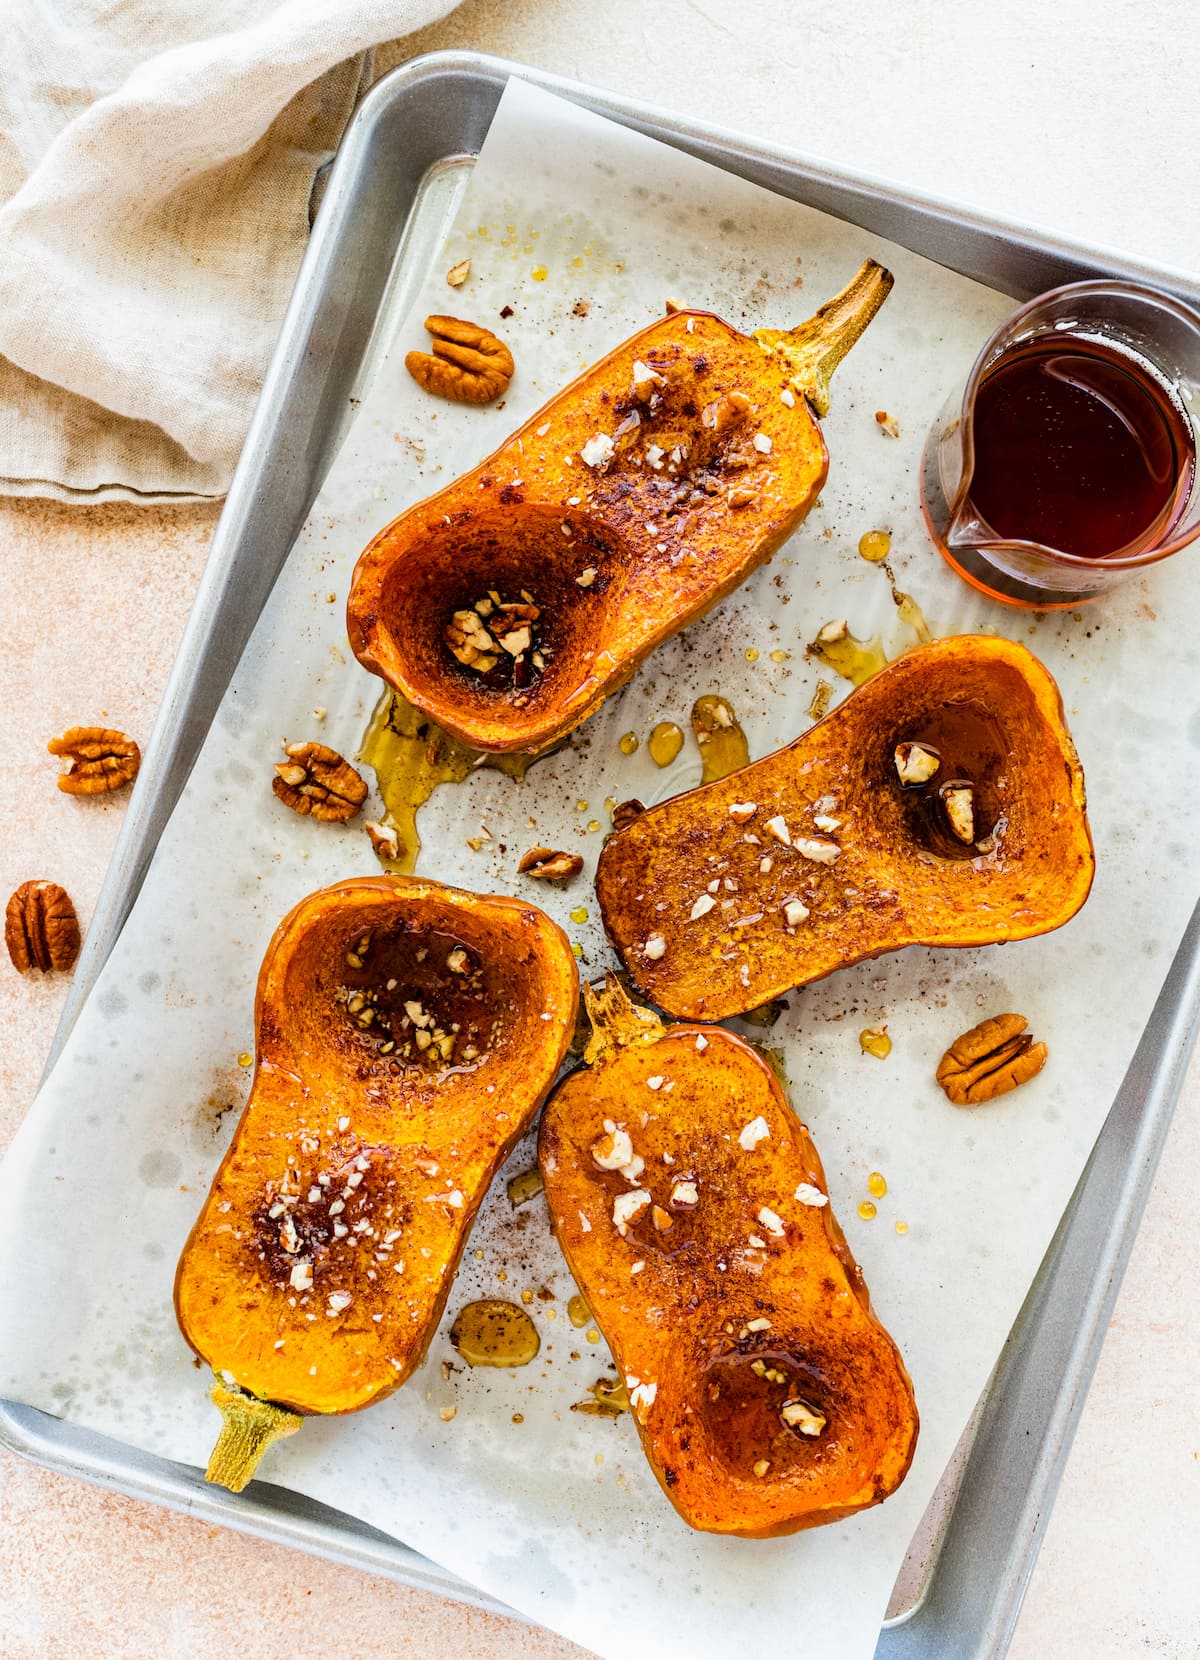 Two halved roasted honeynut squash on a baking tray with maple syrup and crushed pecans.